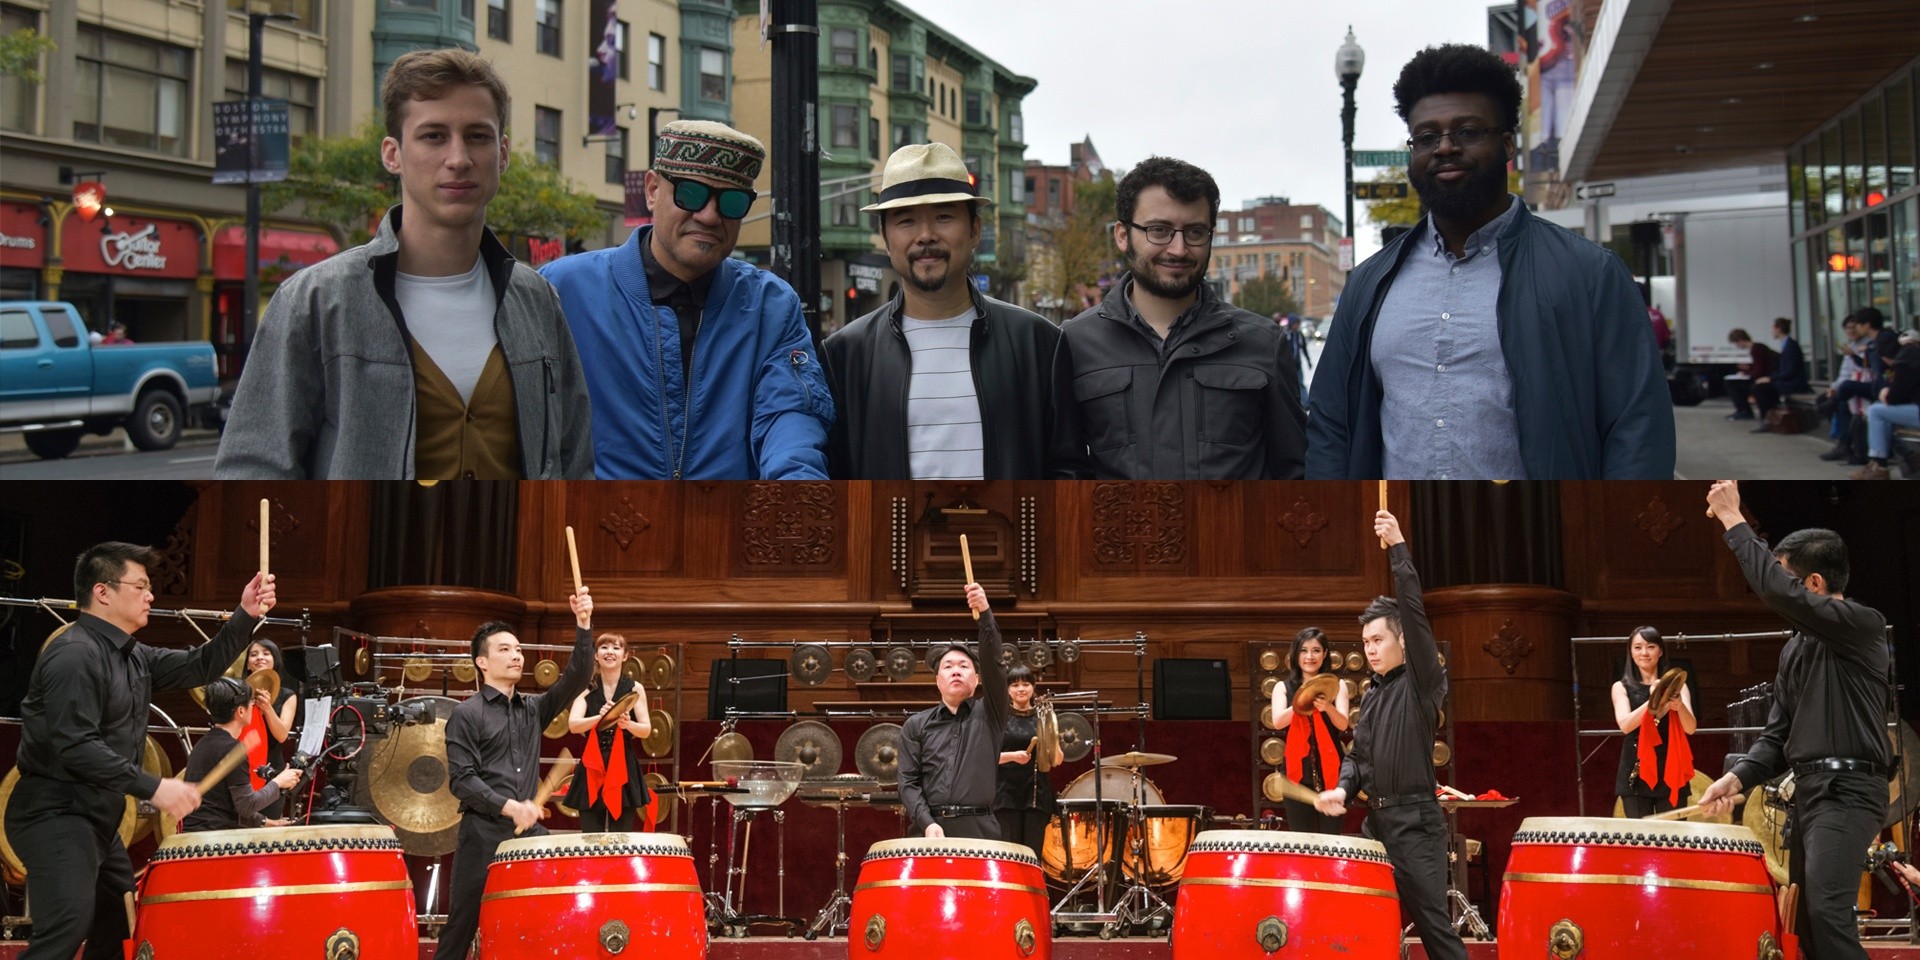 Huayi 2018 promises musical virtuosity in the sounds of suona jazz and percussion ensemble